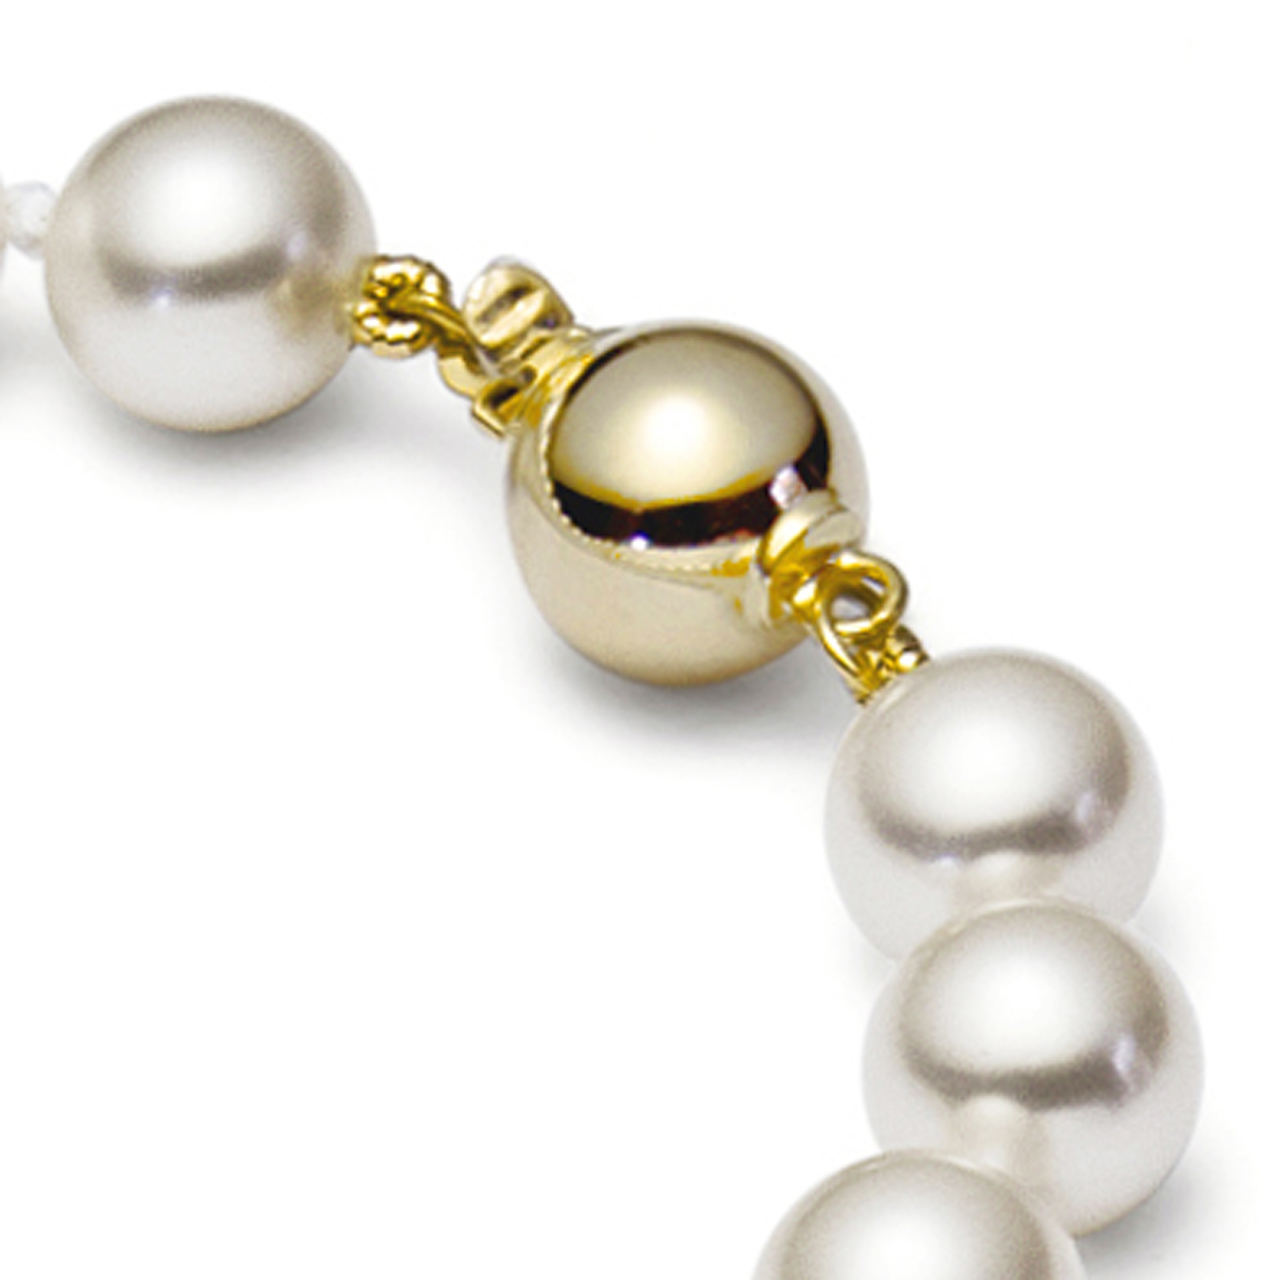 The Pearl Source Real Pearl Necklace for Women with AAA+ Quality Round  White Freshwater Genuine Cultured Pearls | 18 inch Pearl Strand with 14K  Gold